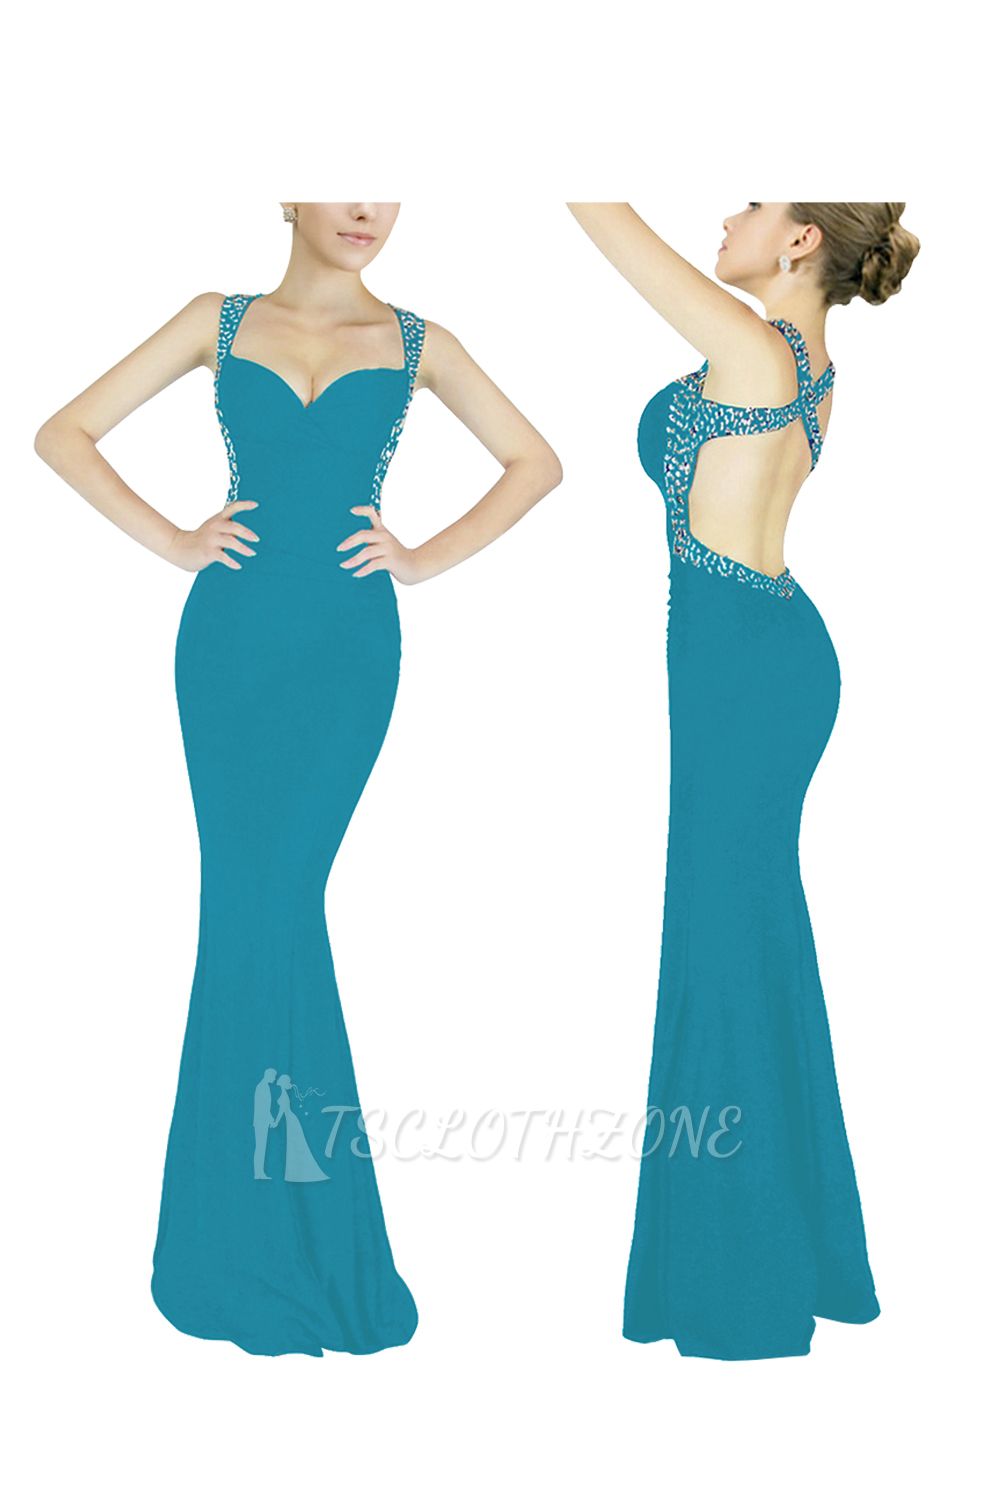 Ceci | Criss-cross Back Mermaid Prom Dress with Beaded Straps